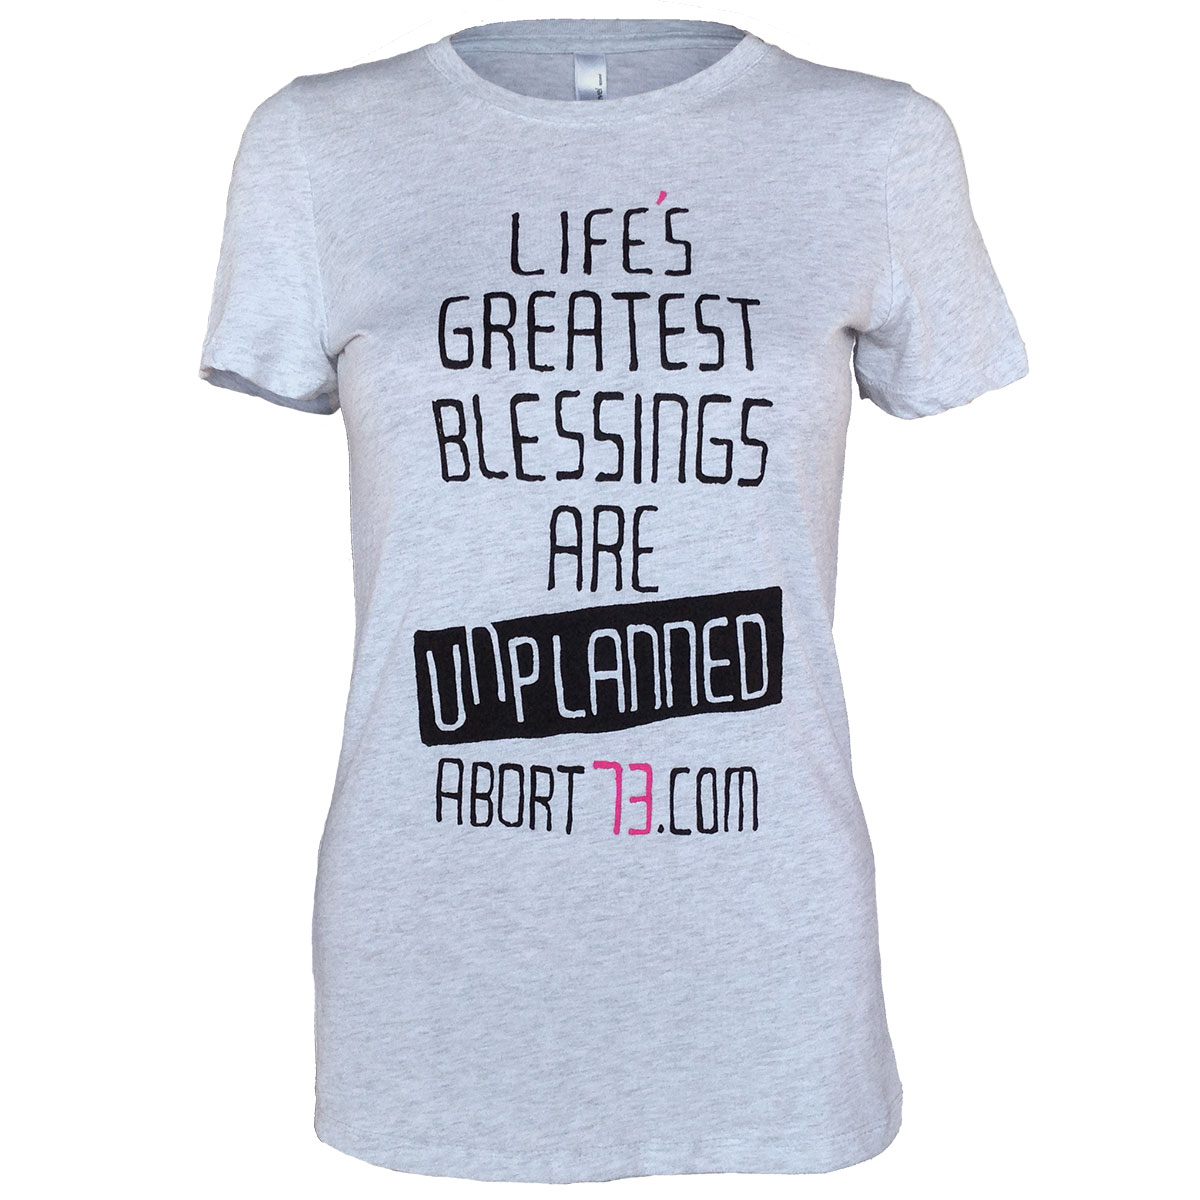 Life’s Greatest Blessings Are Unplanned (Abort73 Girls Tri-Blend T-shirt 6710)